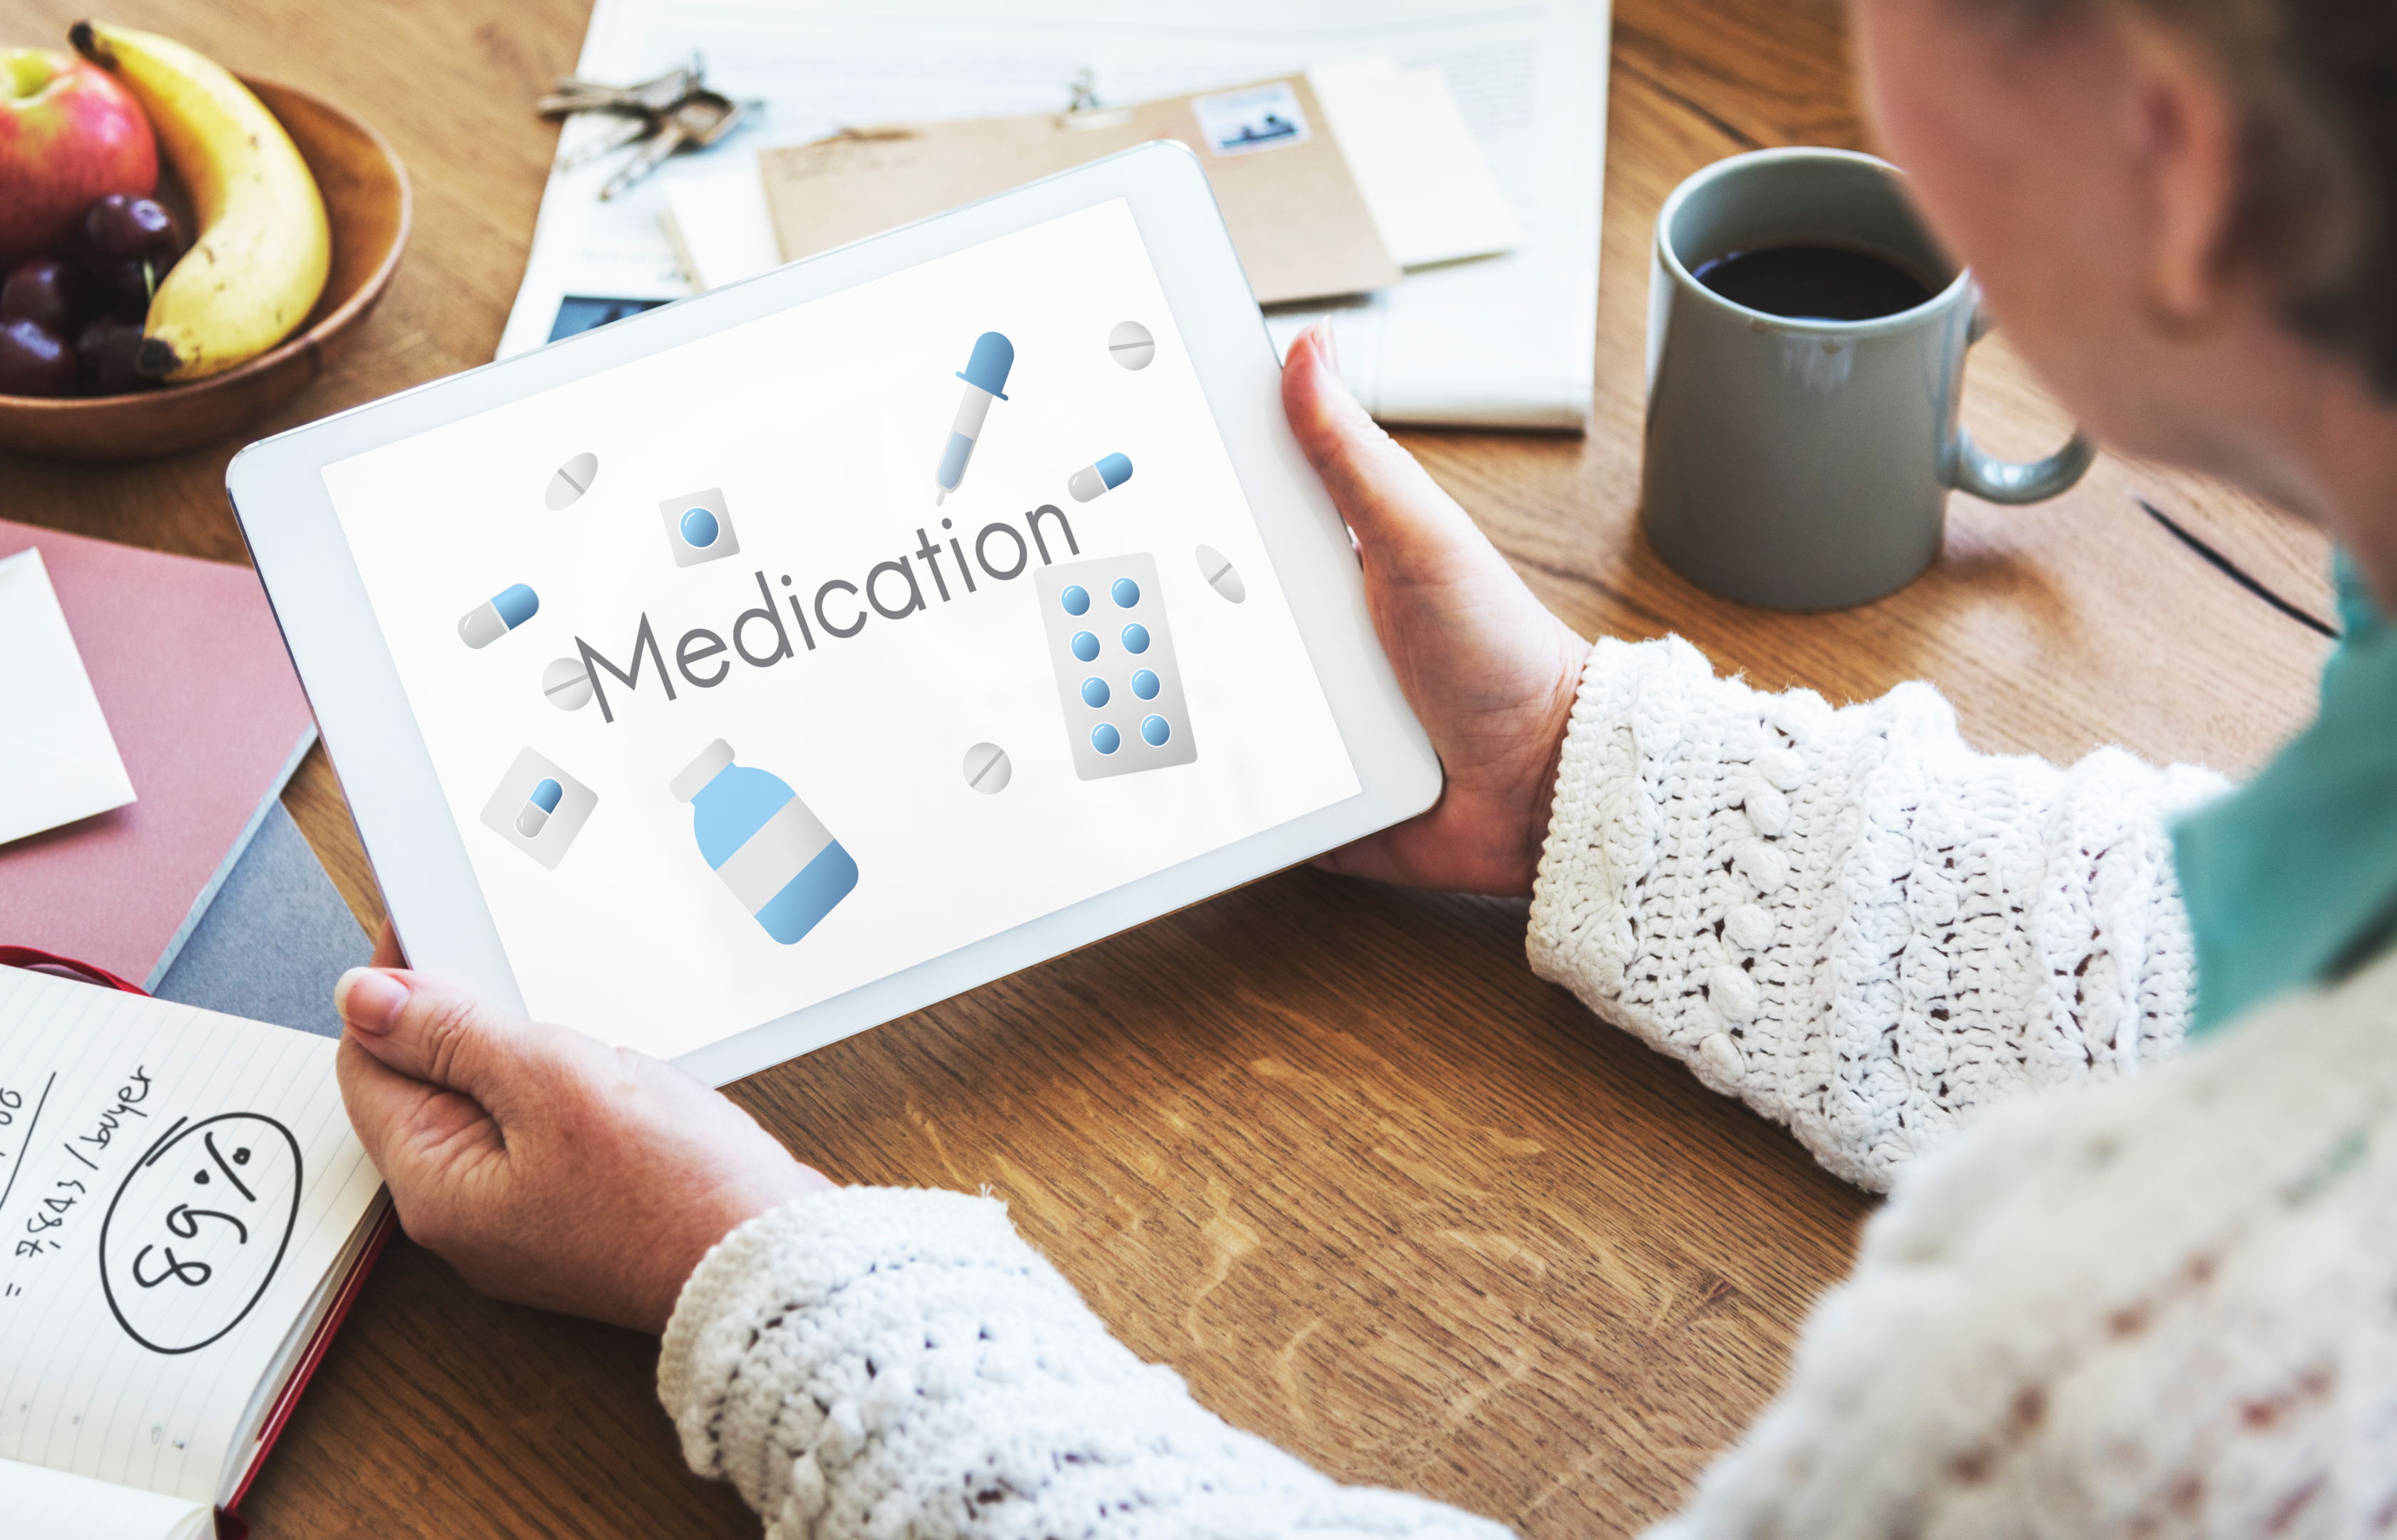 The electronic repeat prescriptions allow the healthcare agency to keep an electronic record of your health.